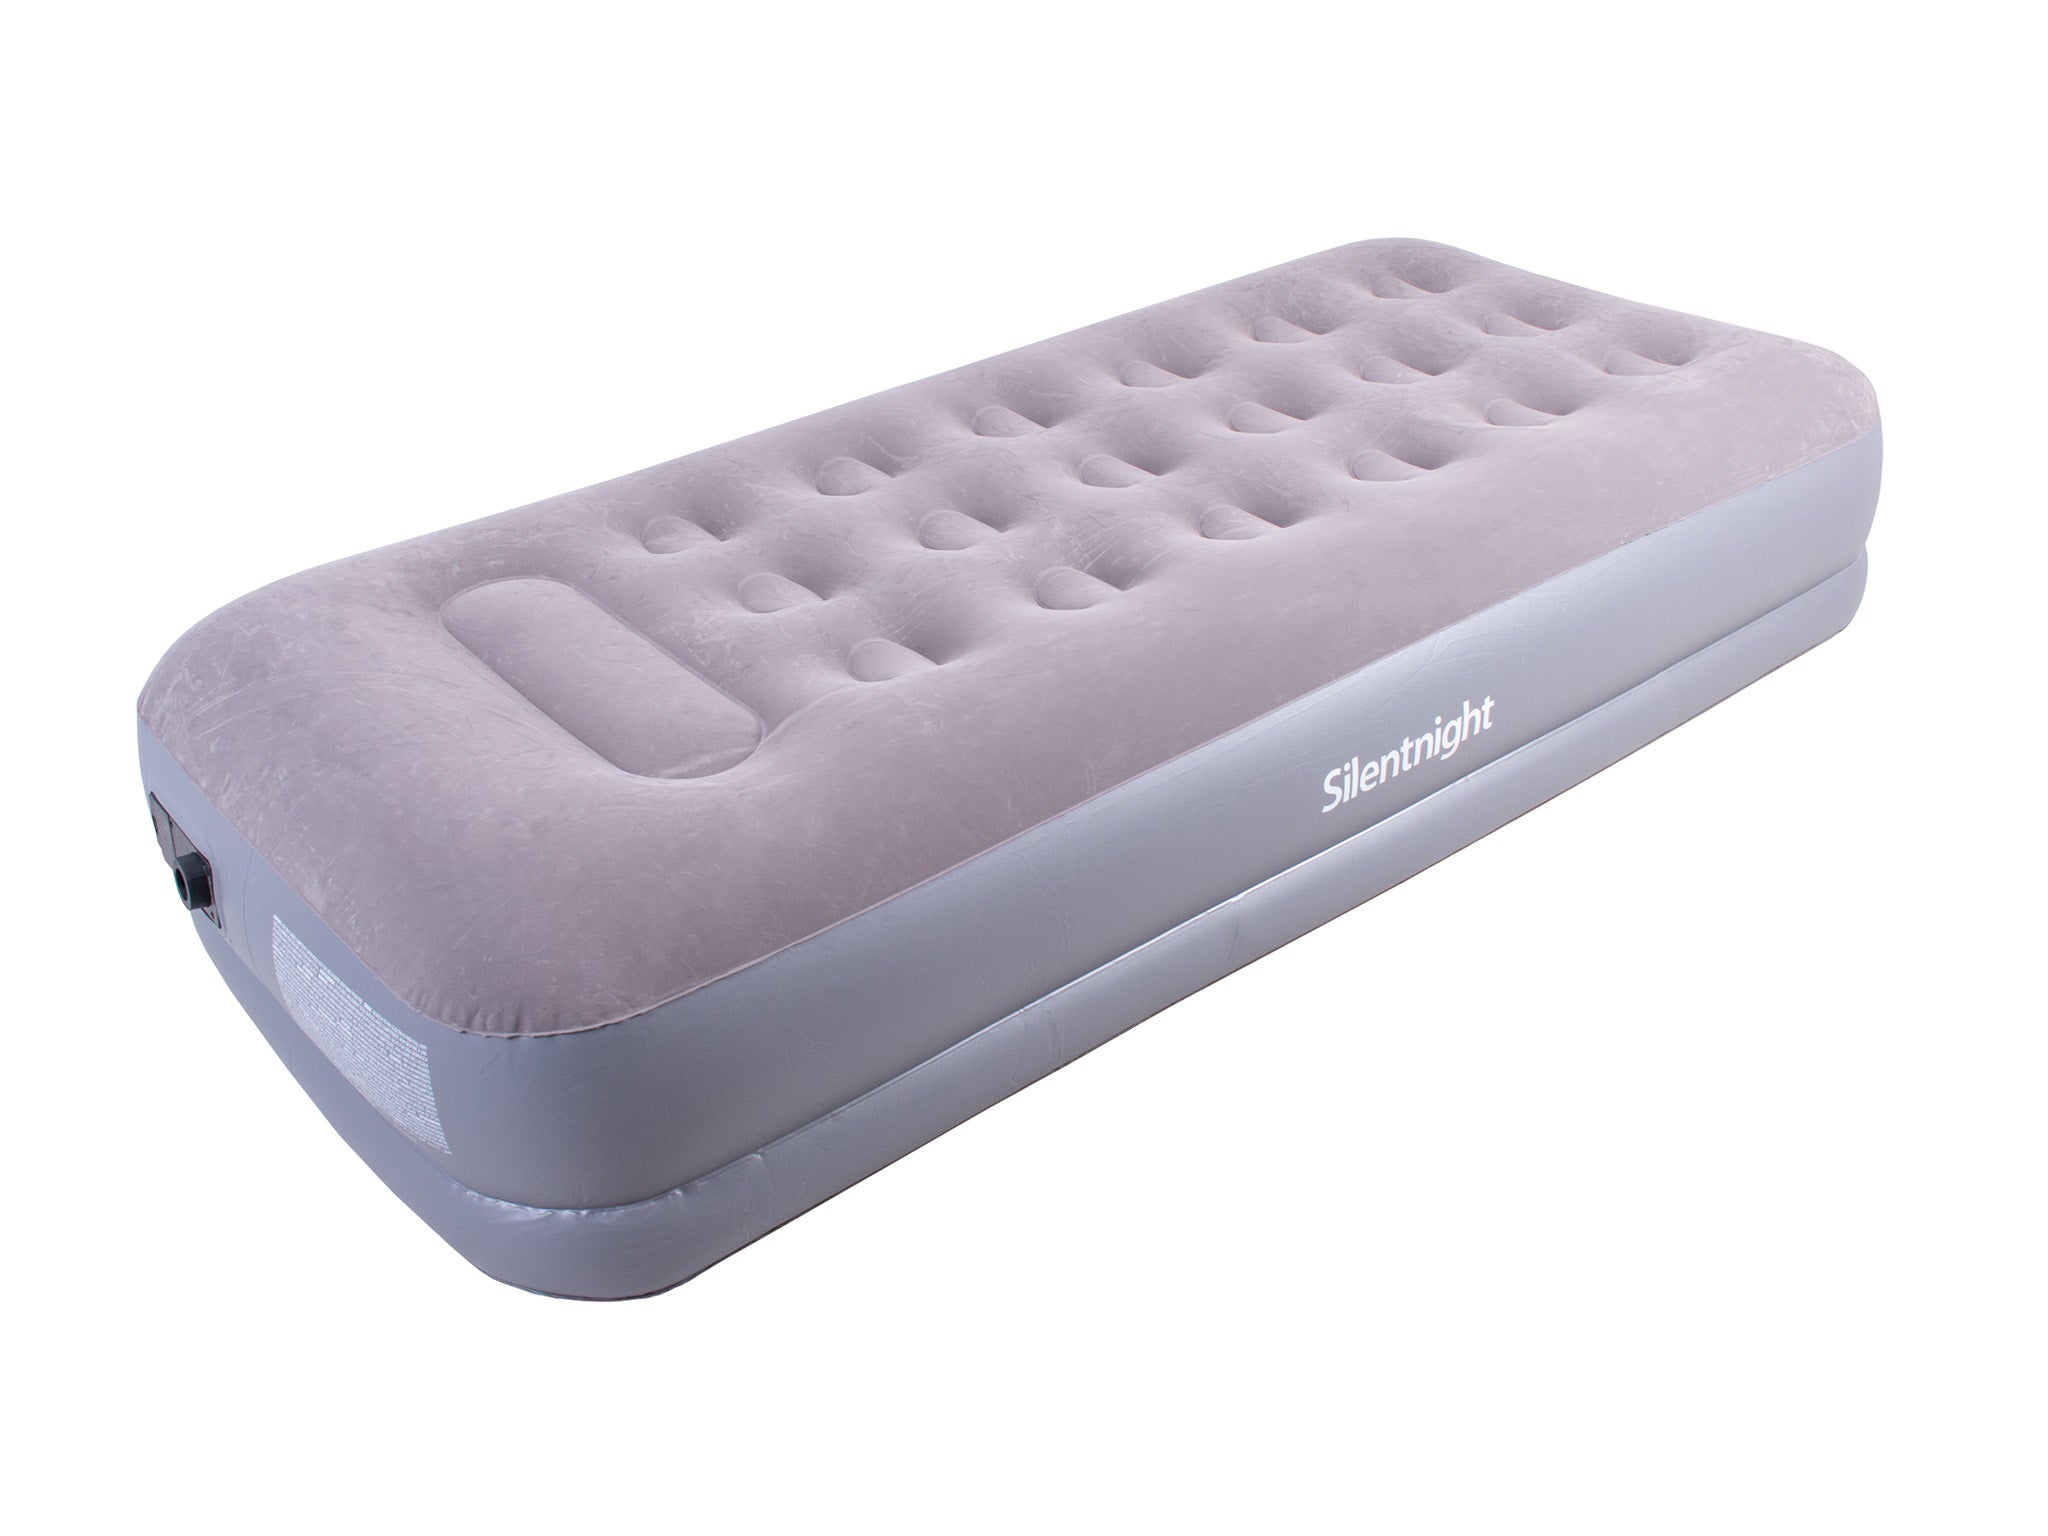 Basics Pillow Rest Single Size Premium Airbed with Built in Air Pump EU 